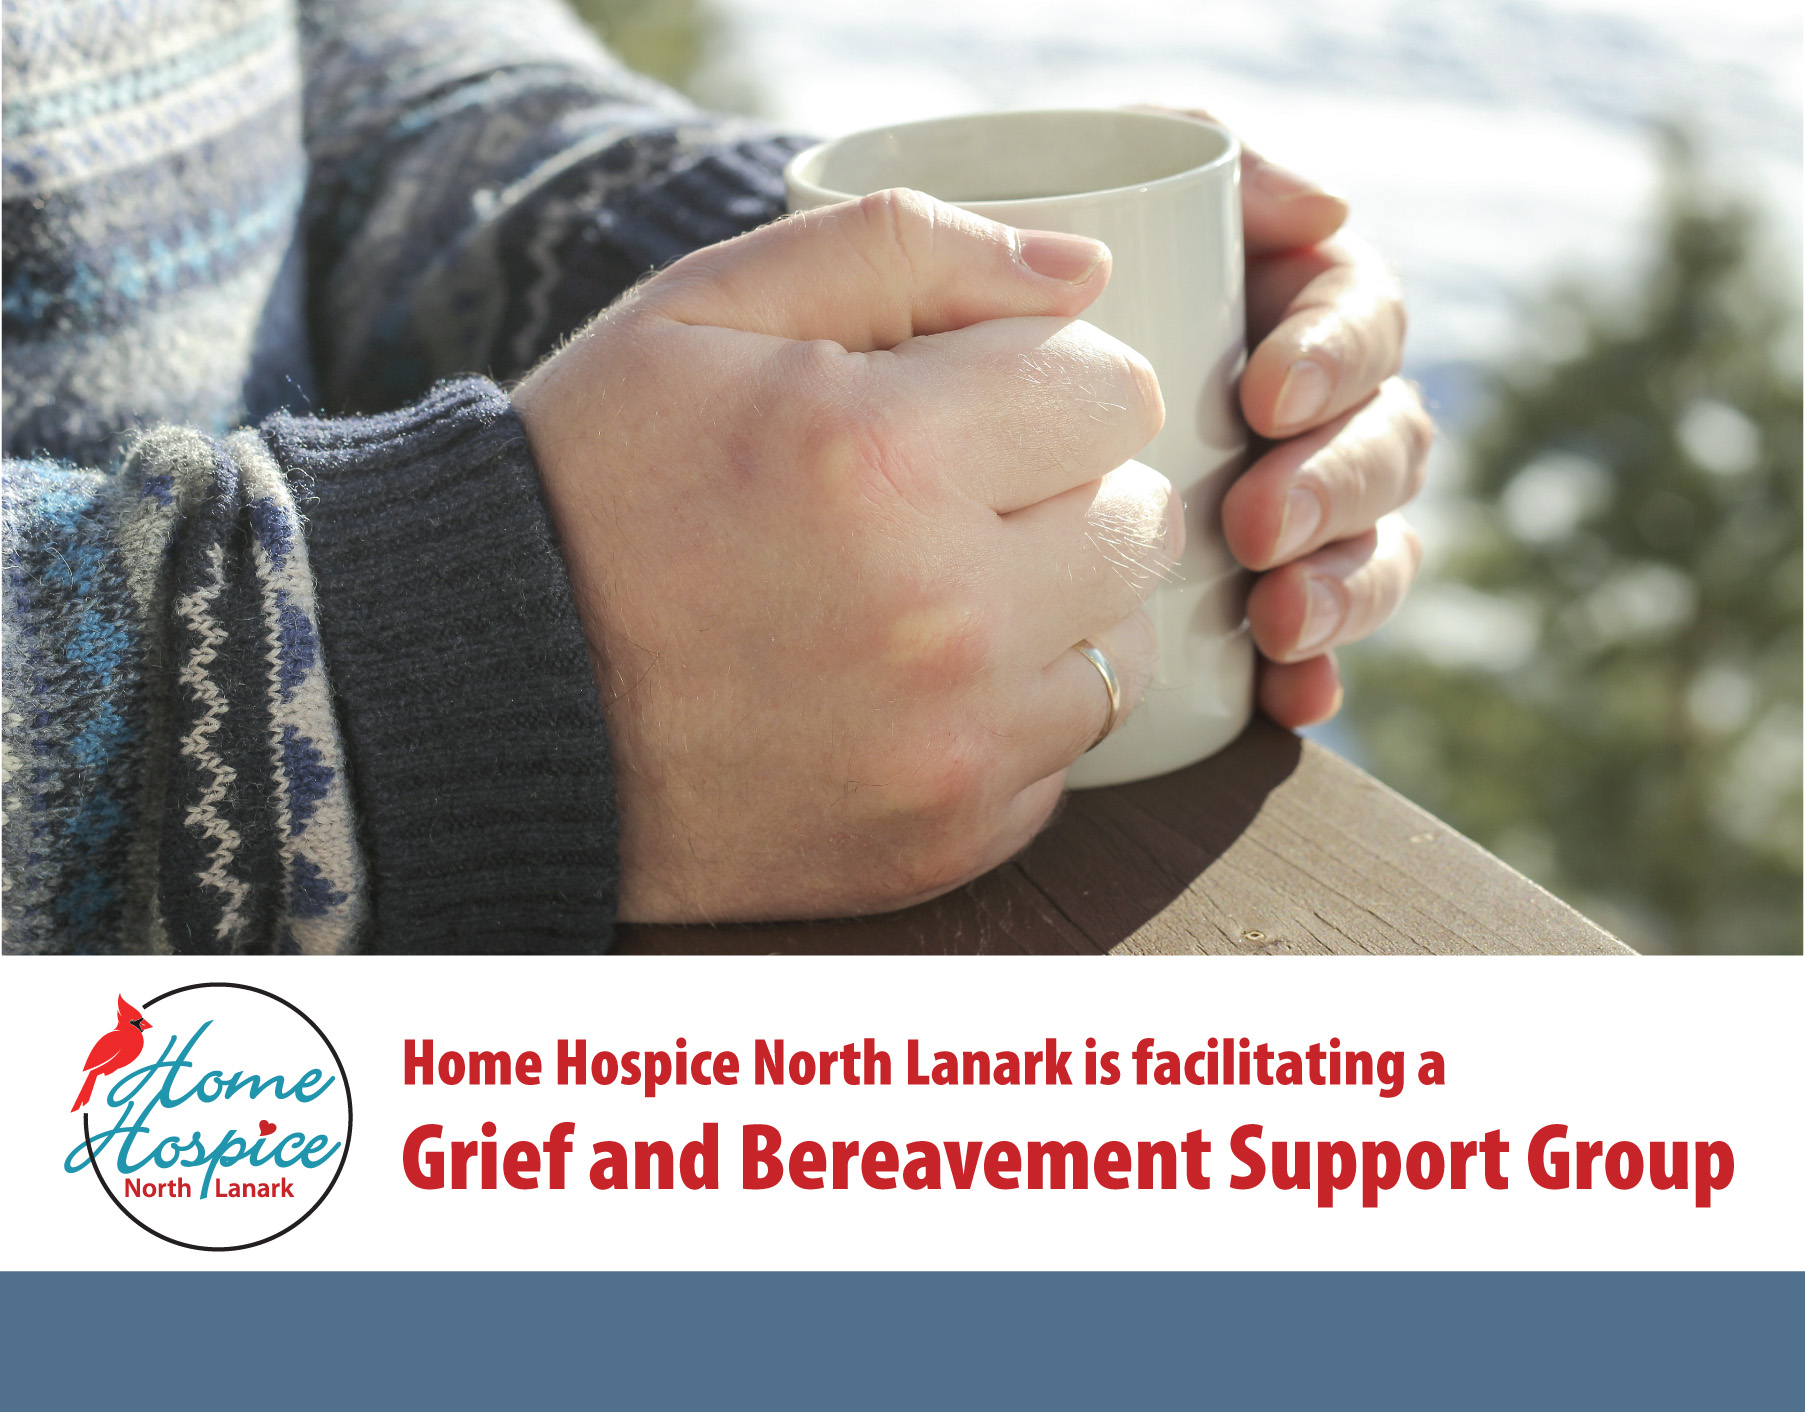 home hospice north lanark grief bereavement support group